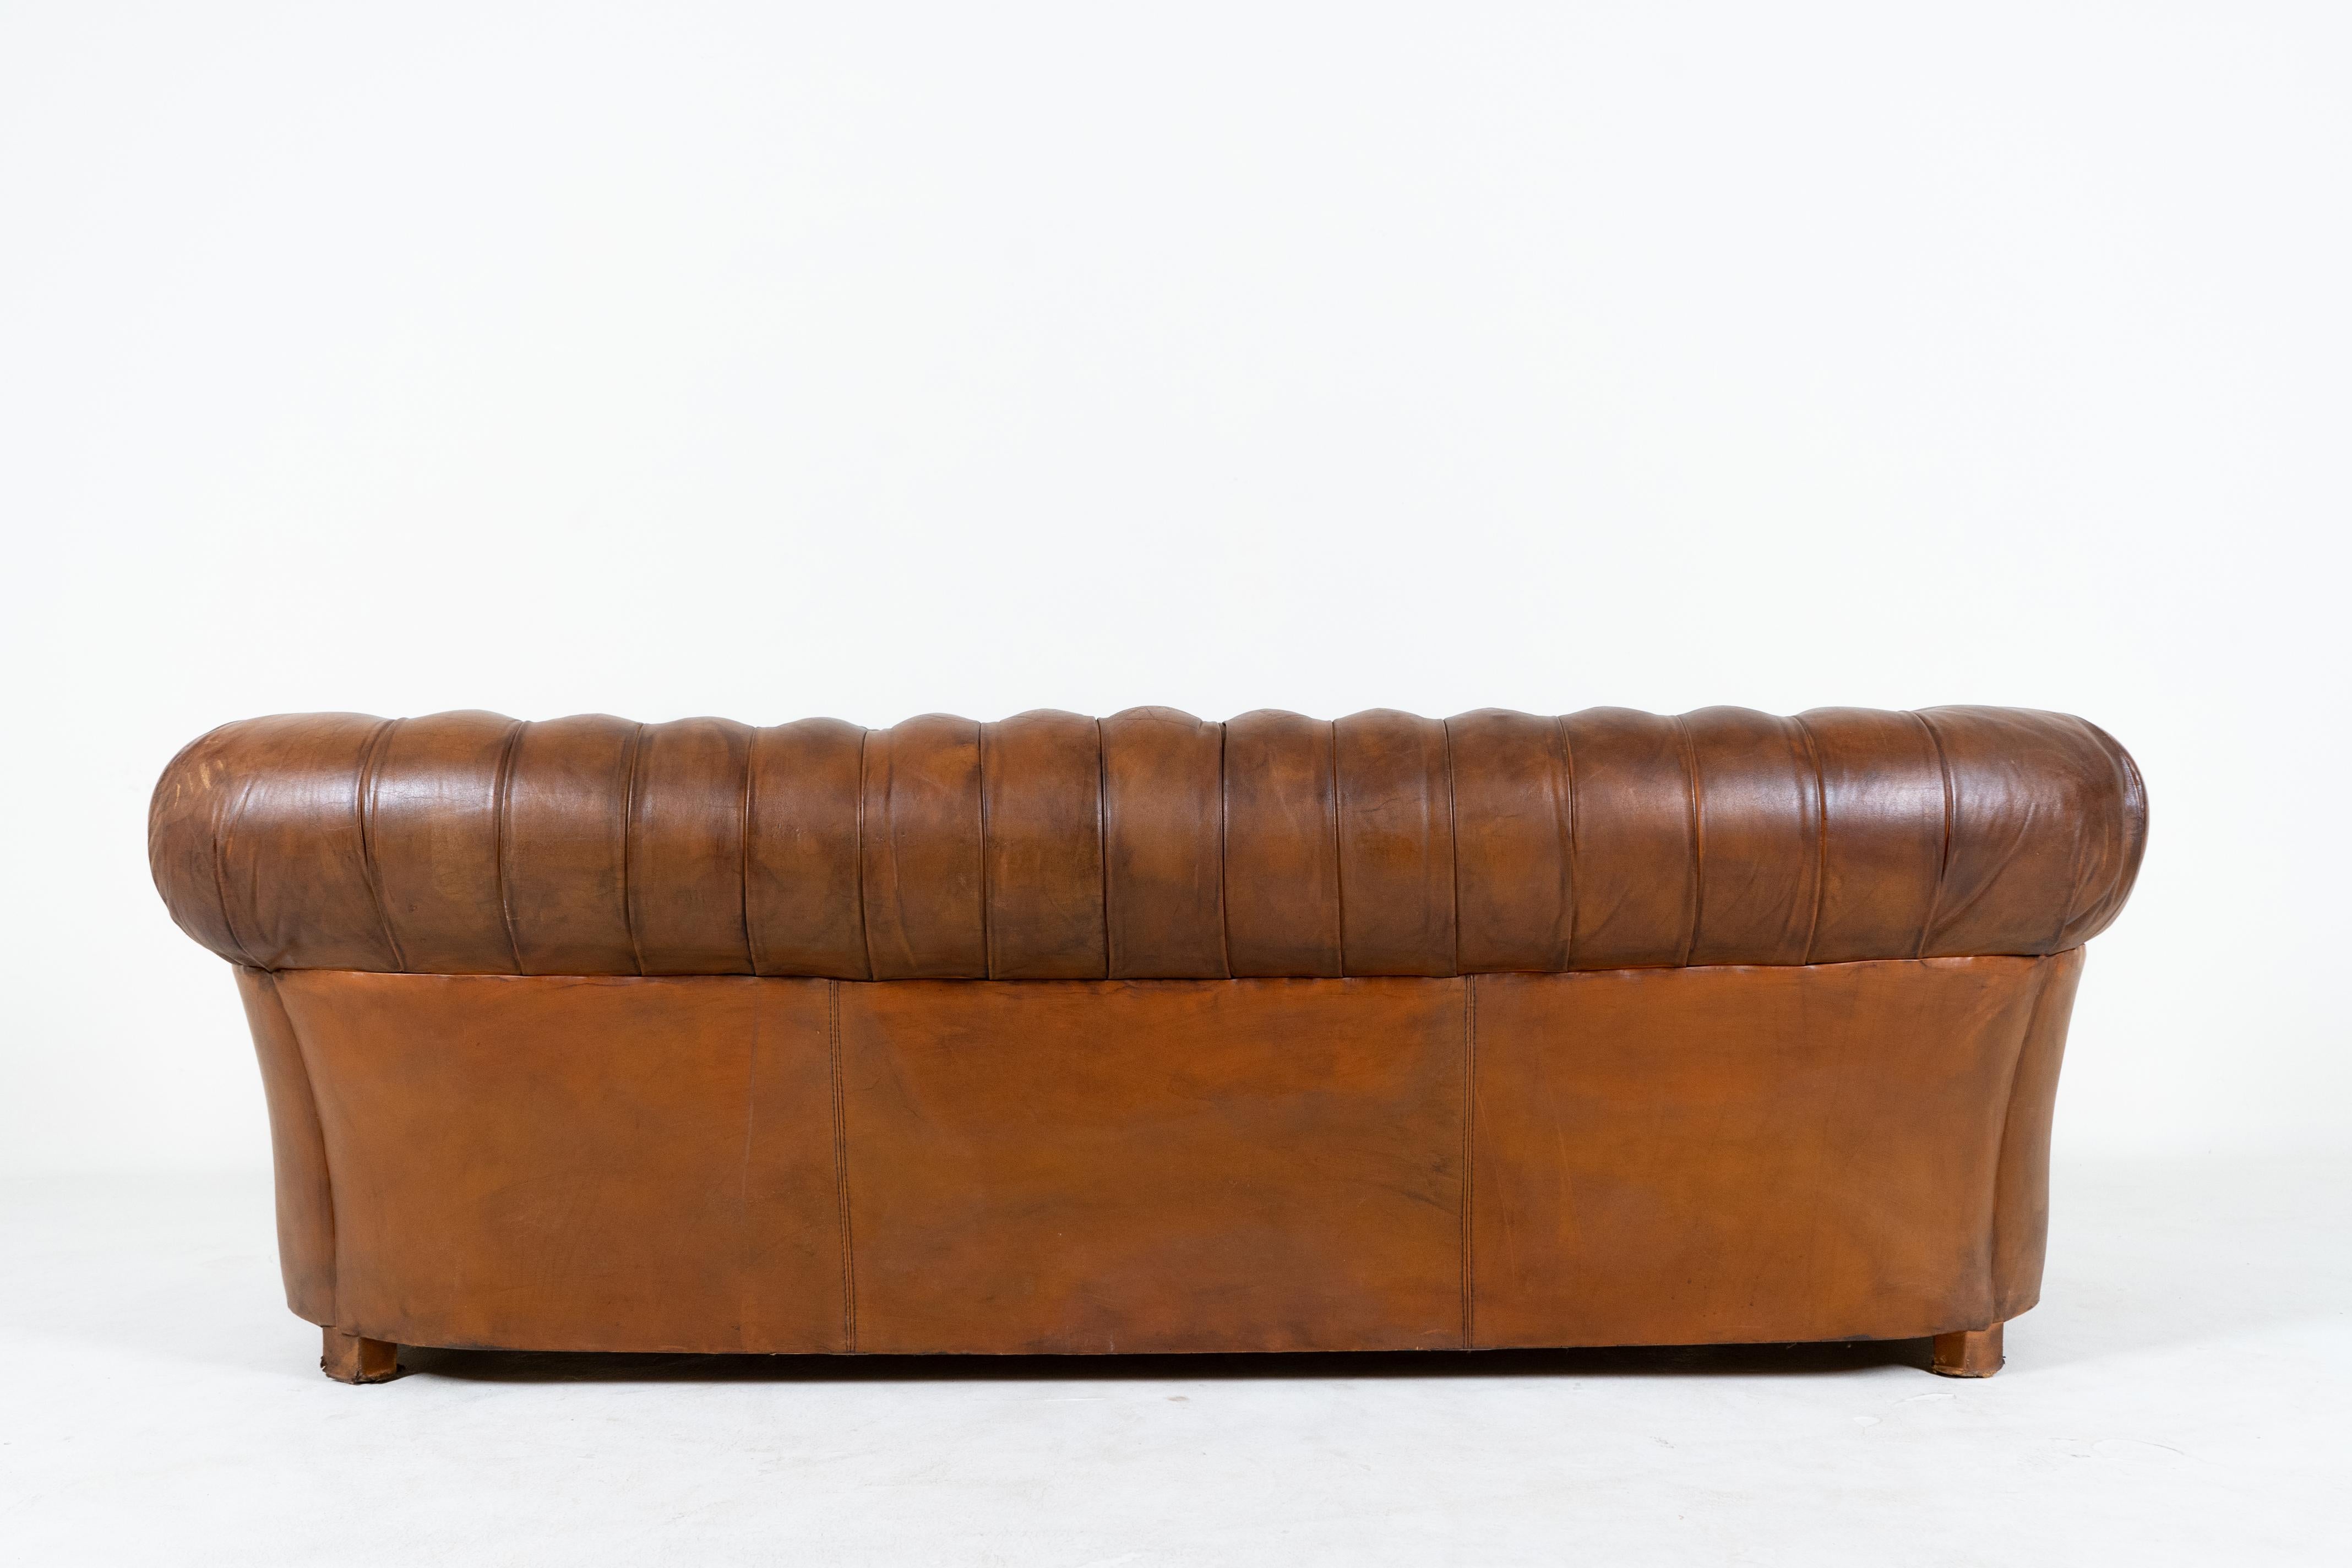 20th Century A Vintage Chesterfield Leather Sofa, France c.1960 For Sale